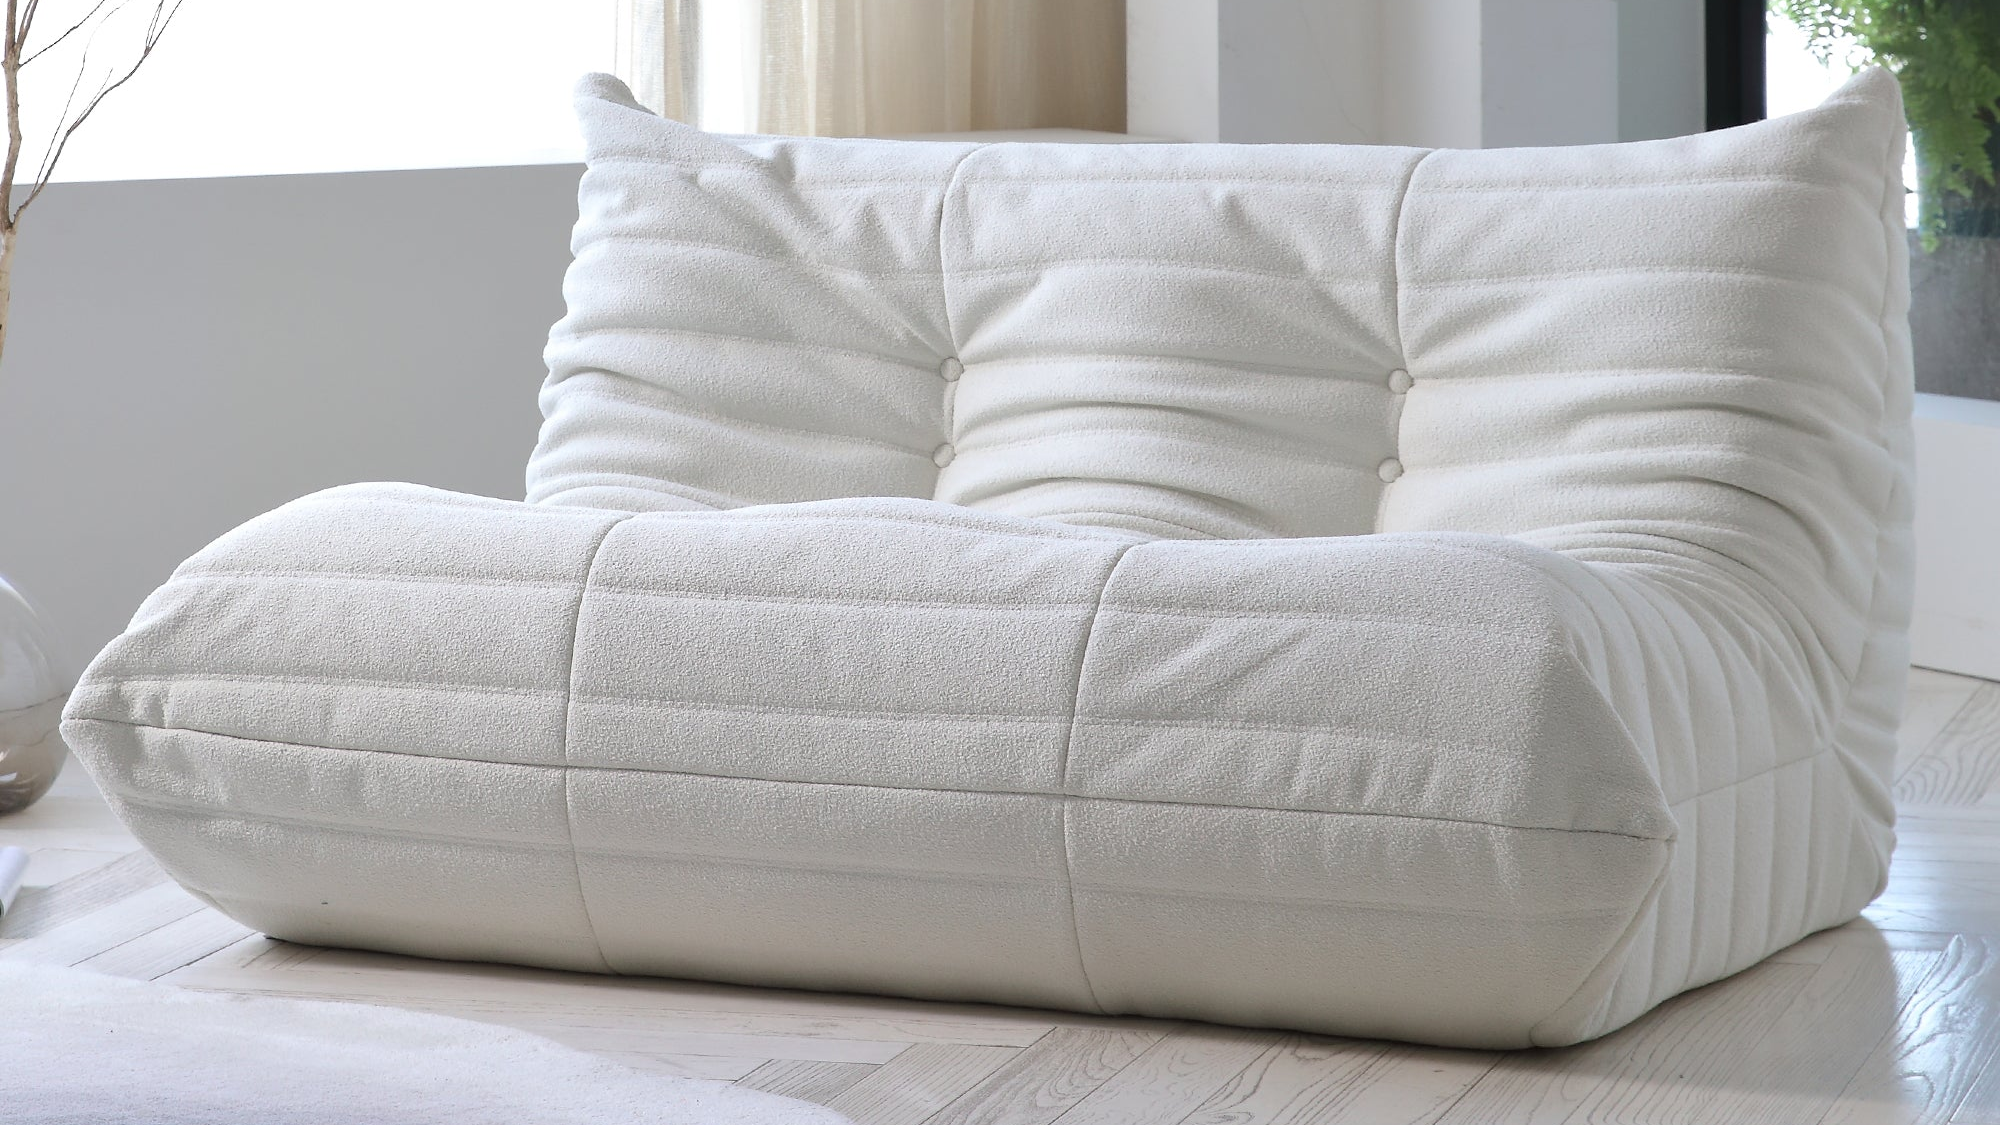 Best Couches for Back Pain